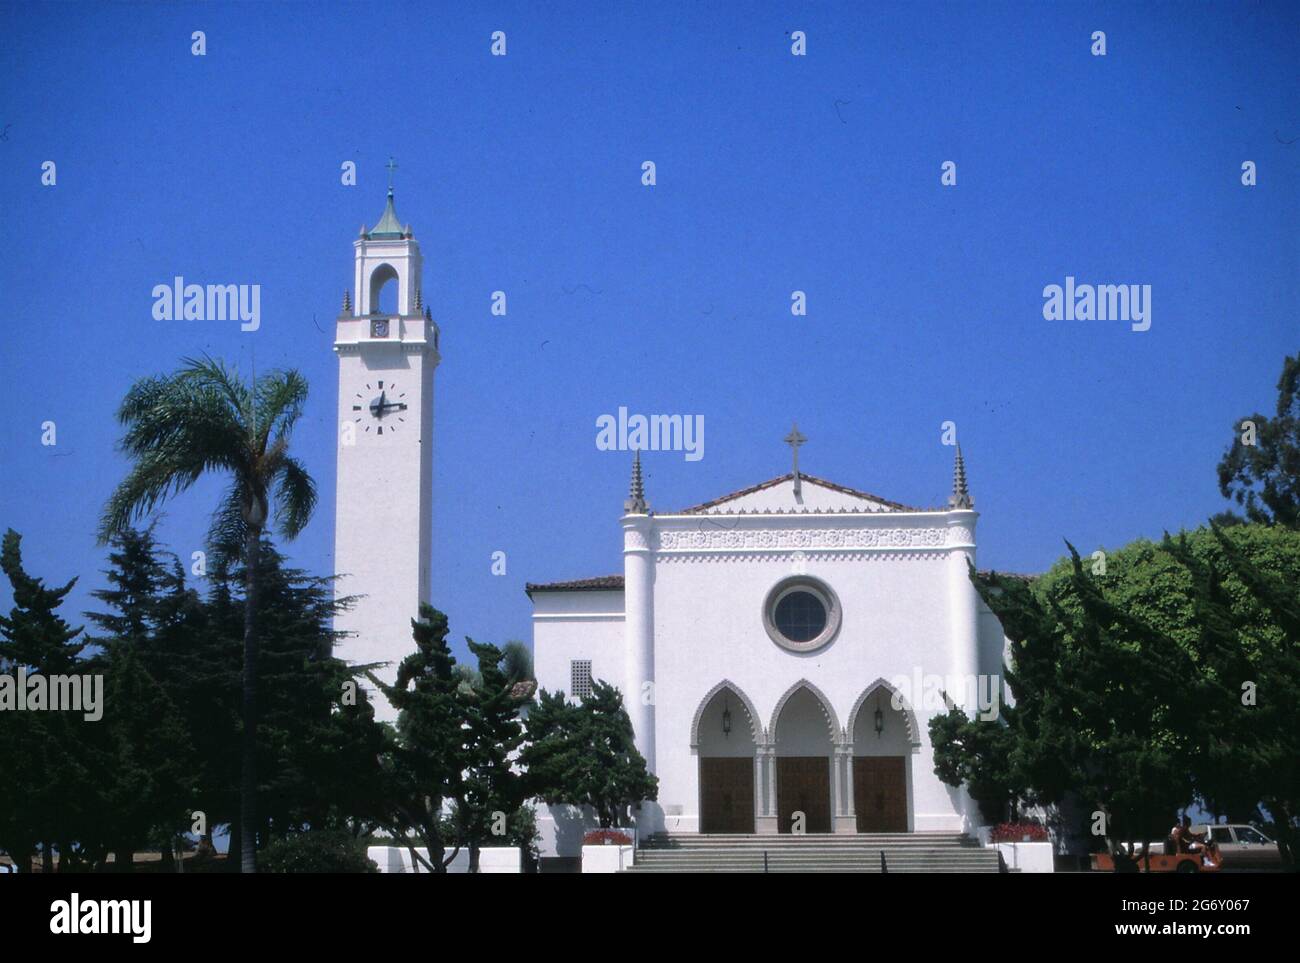 LOS ANGELES, UNITED STATES - Jun 04, 2021: Long view of the Chapel of the Sacred Heart on campus of Loyola Marymount University, California. Stock Photo